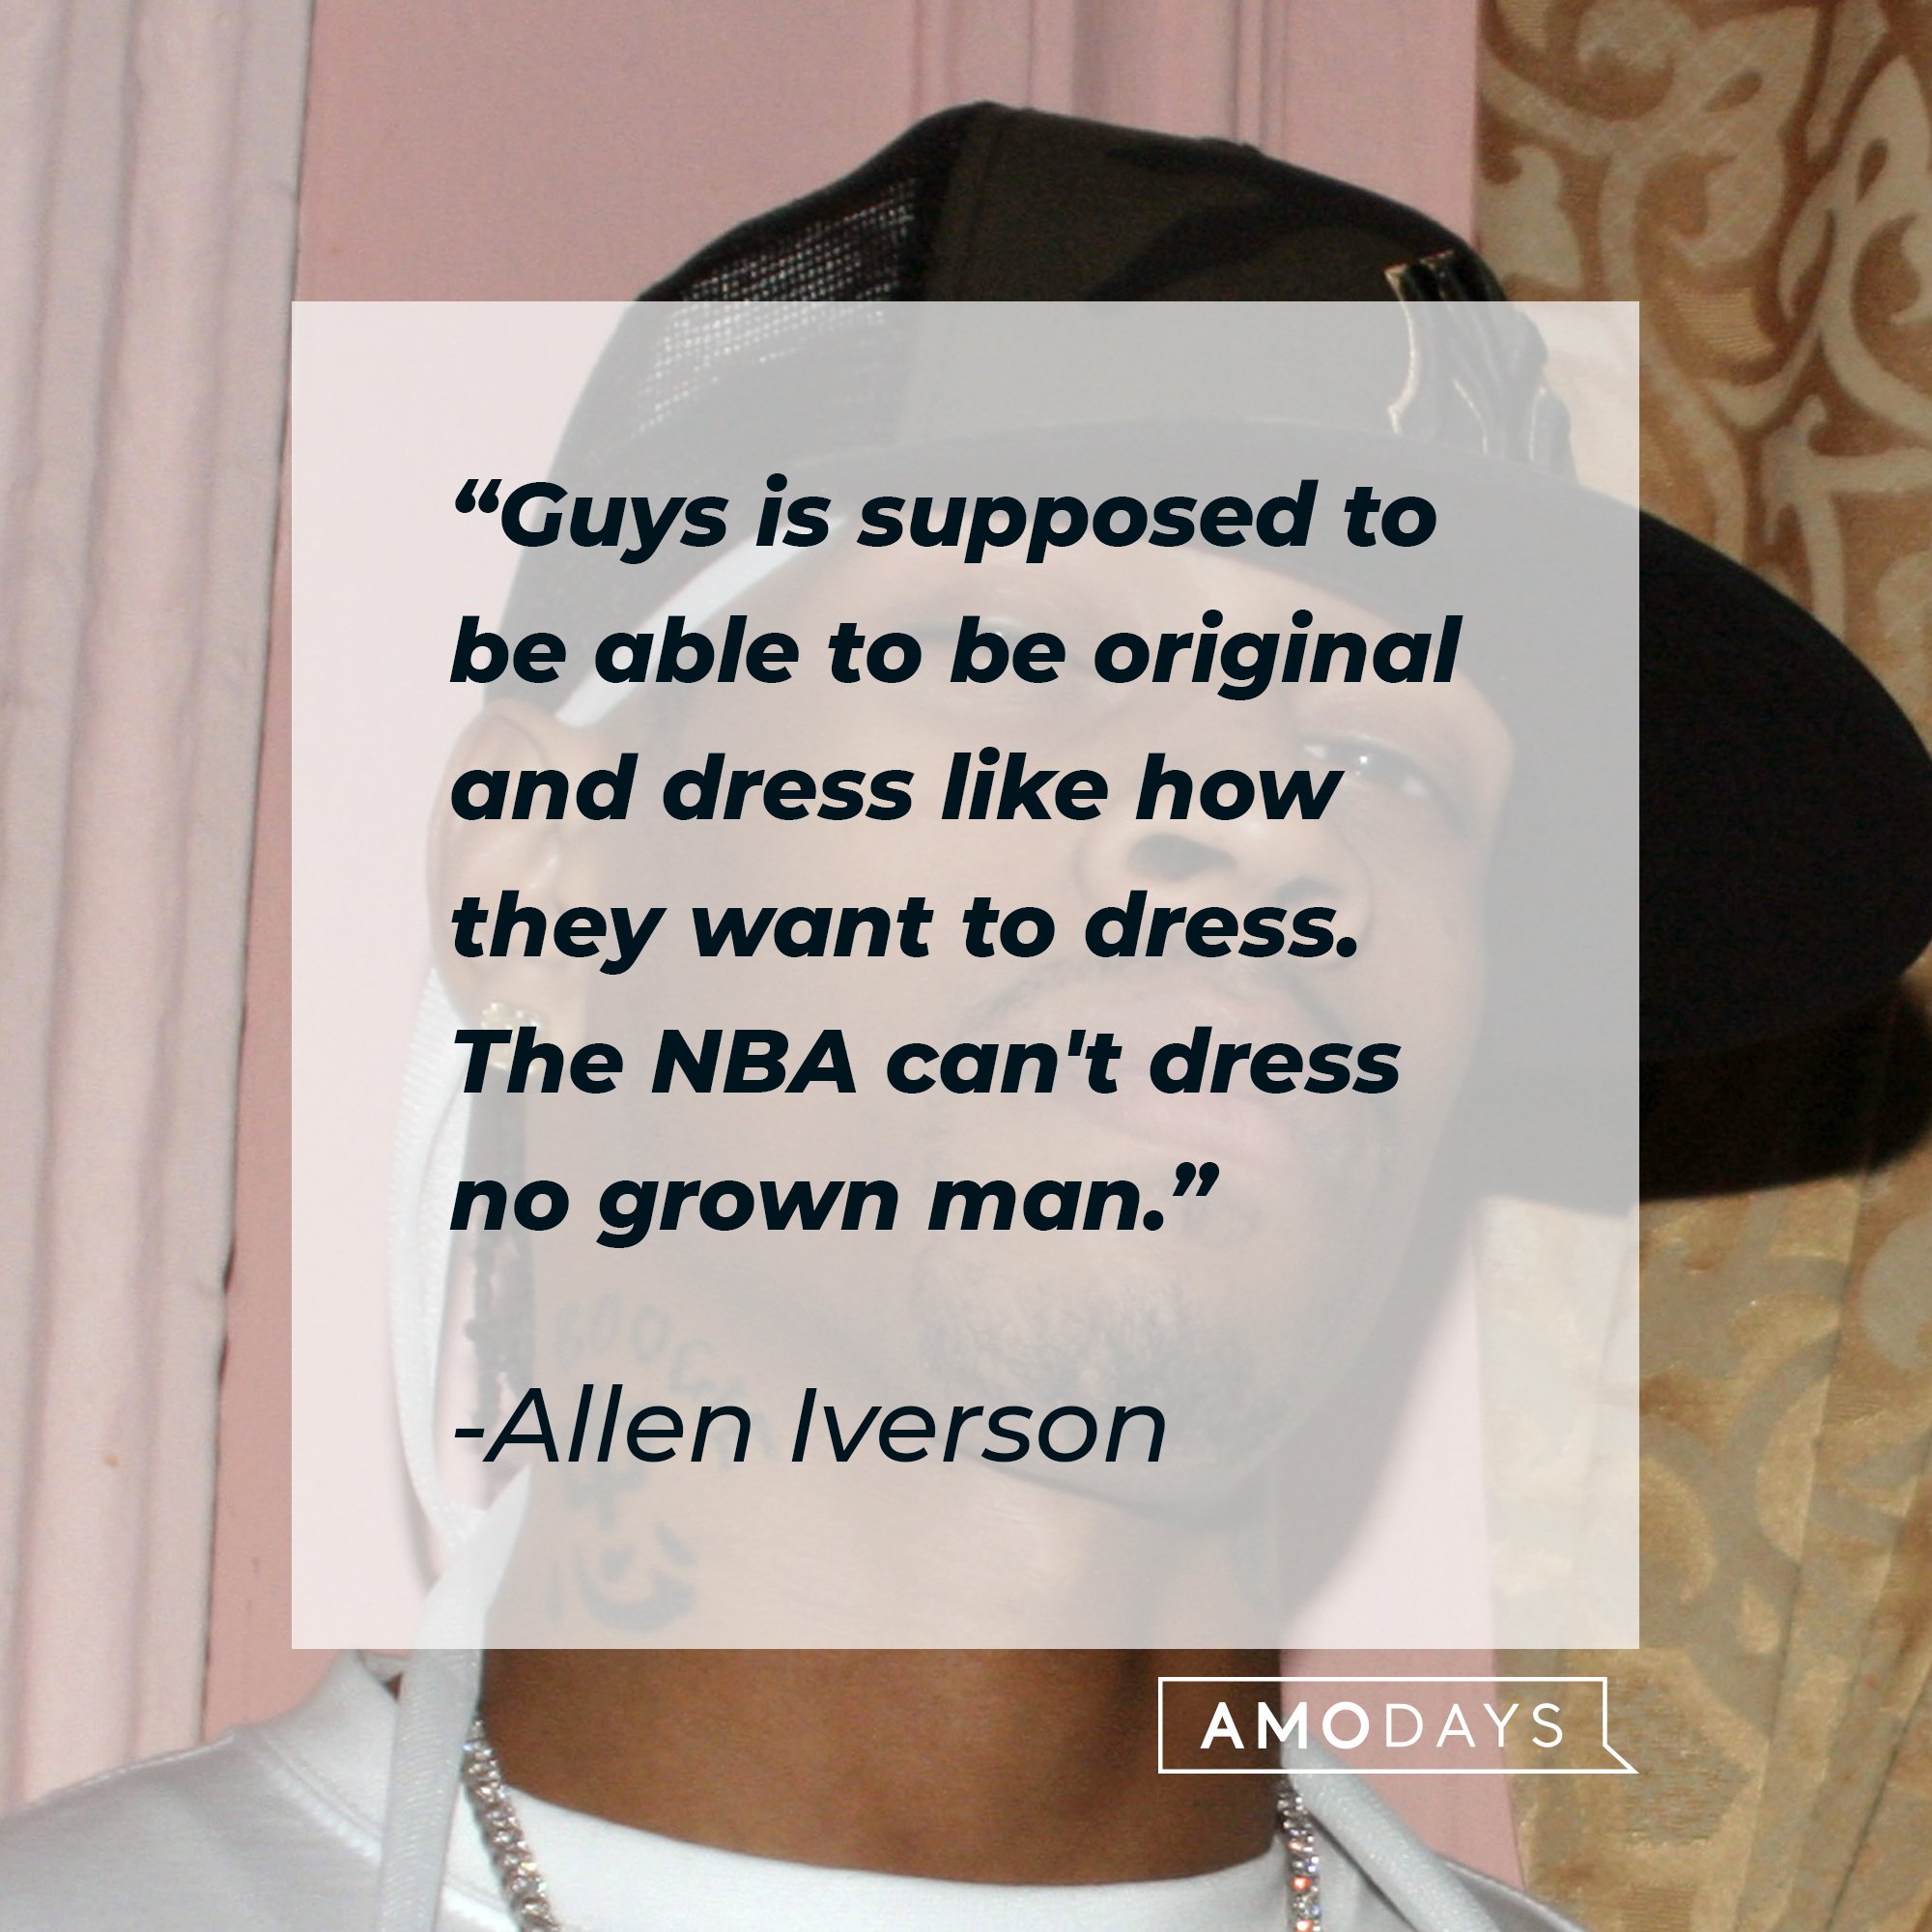 Allen Iverson's quote: "Guys is supposed to be able to be original and dress like how they want to dress. The NBA can't dress no grown man." | Image: AmoDays